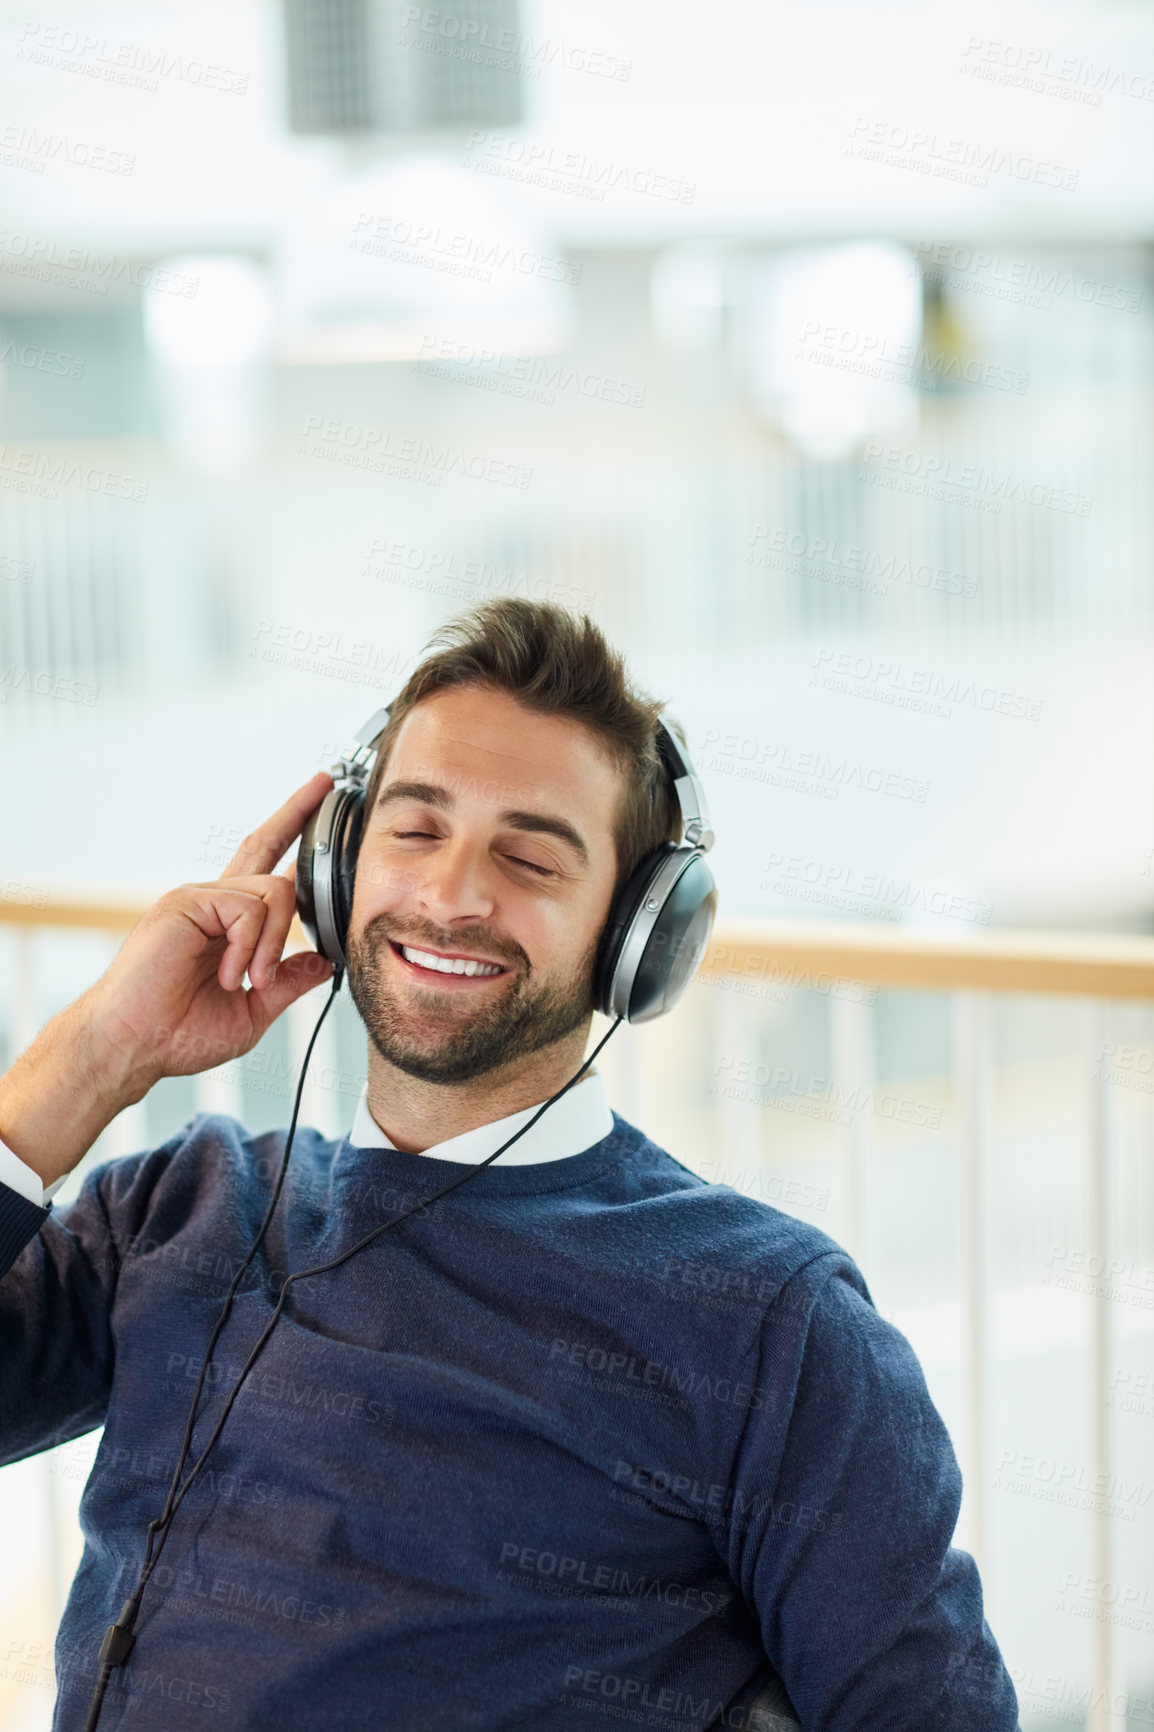 Buy stock photo Shot of a young businessman listening to music in an office